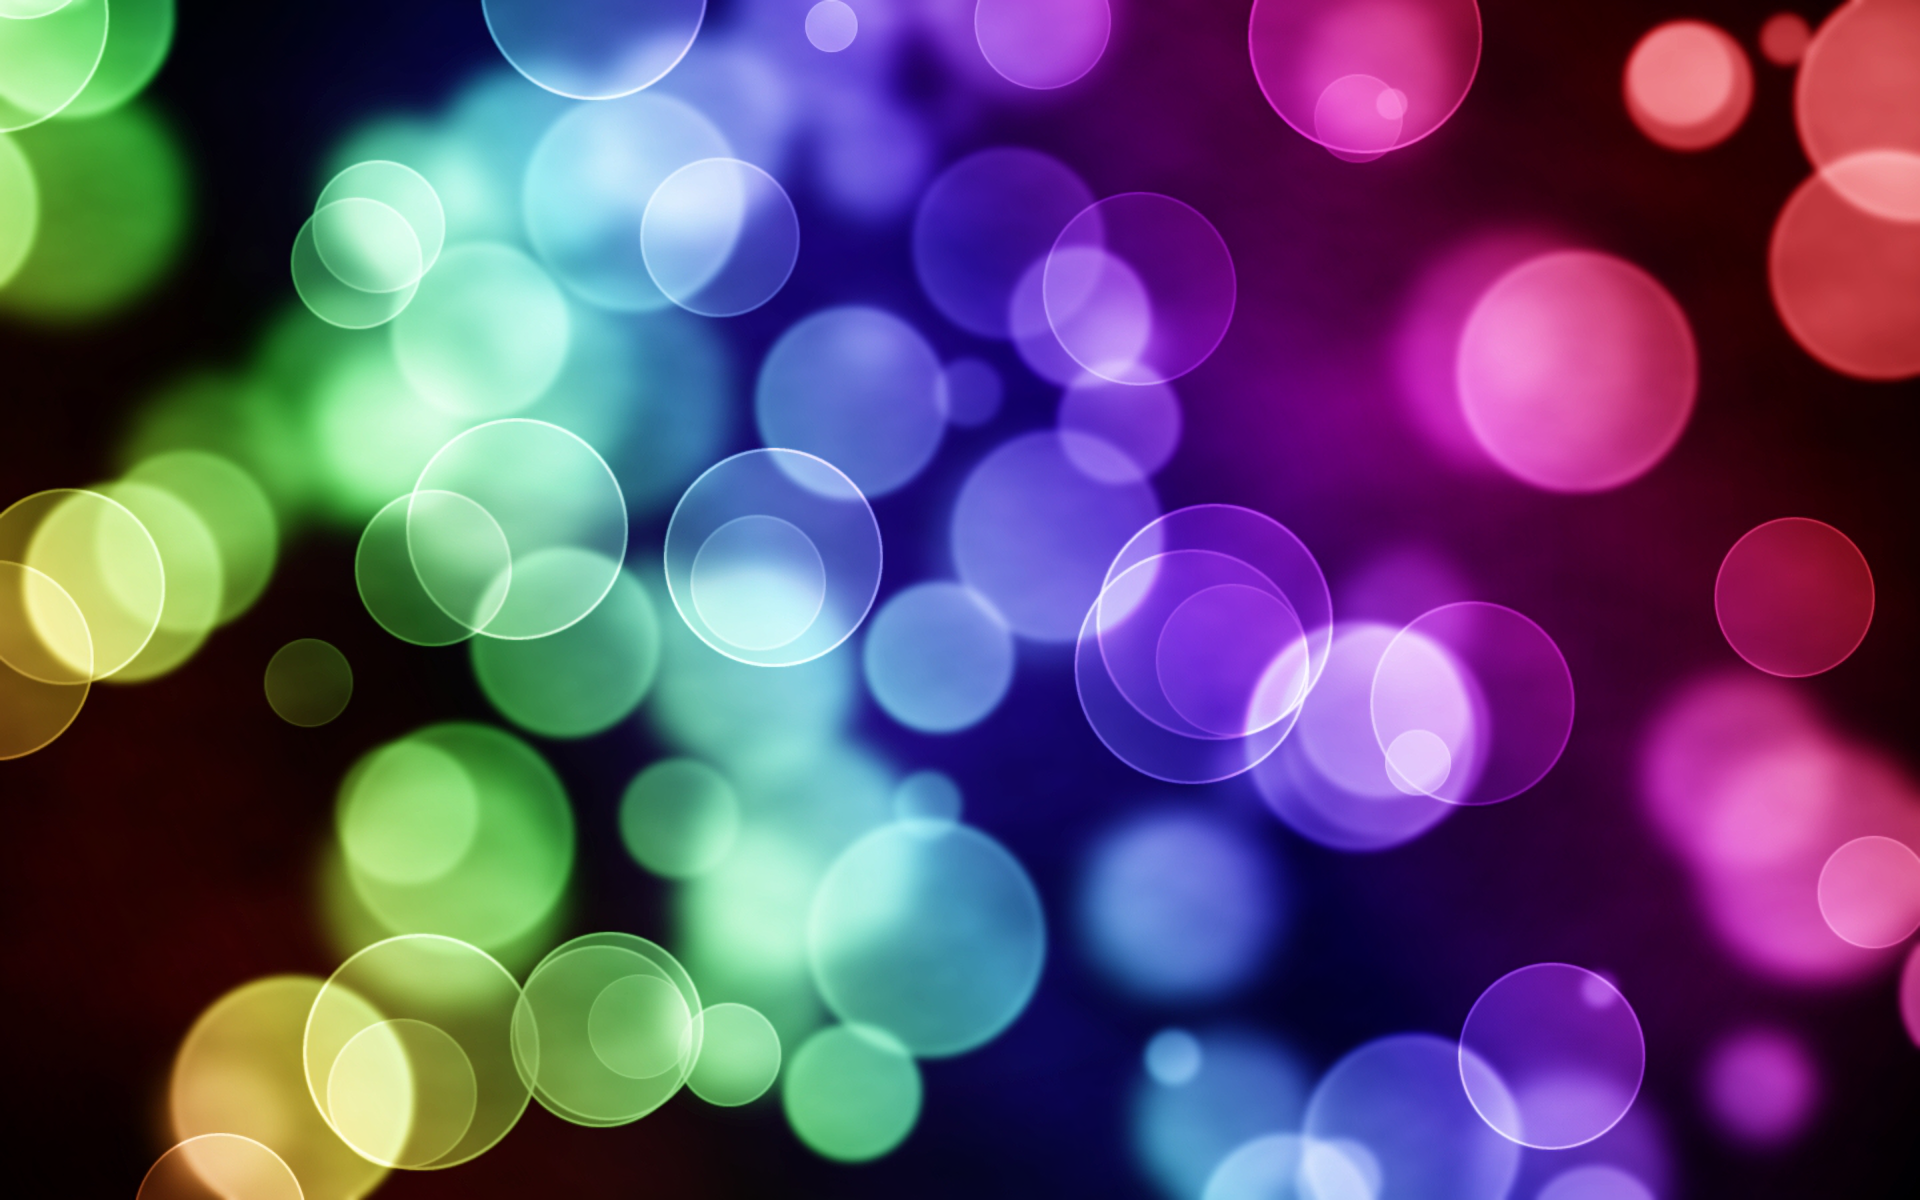 Colorful bubble with gradient circle emitting a rainbow of colors - HD desktop wallpaper.